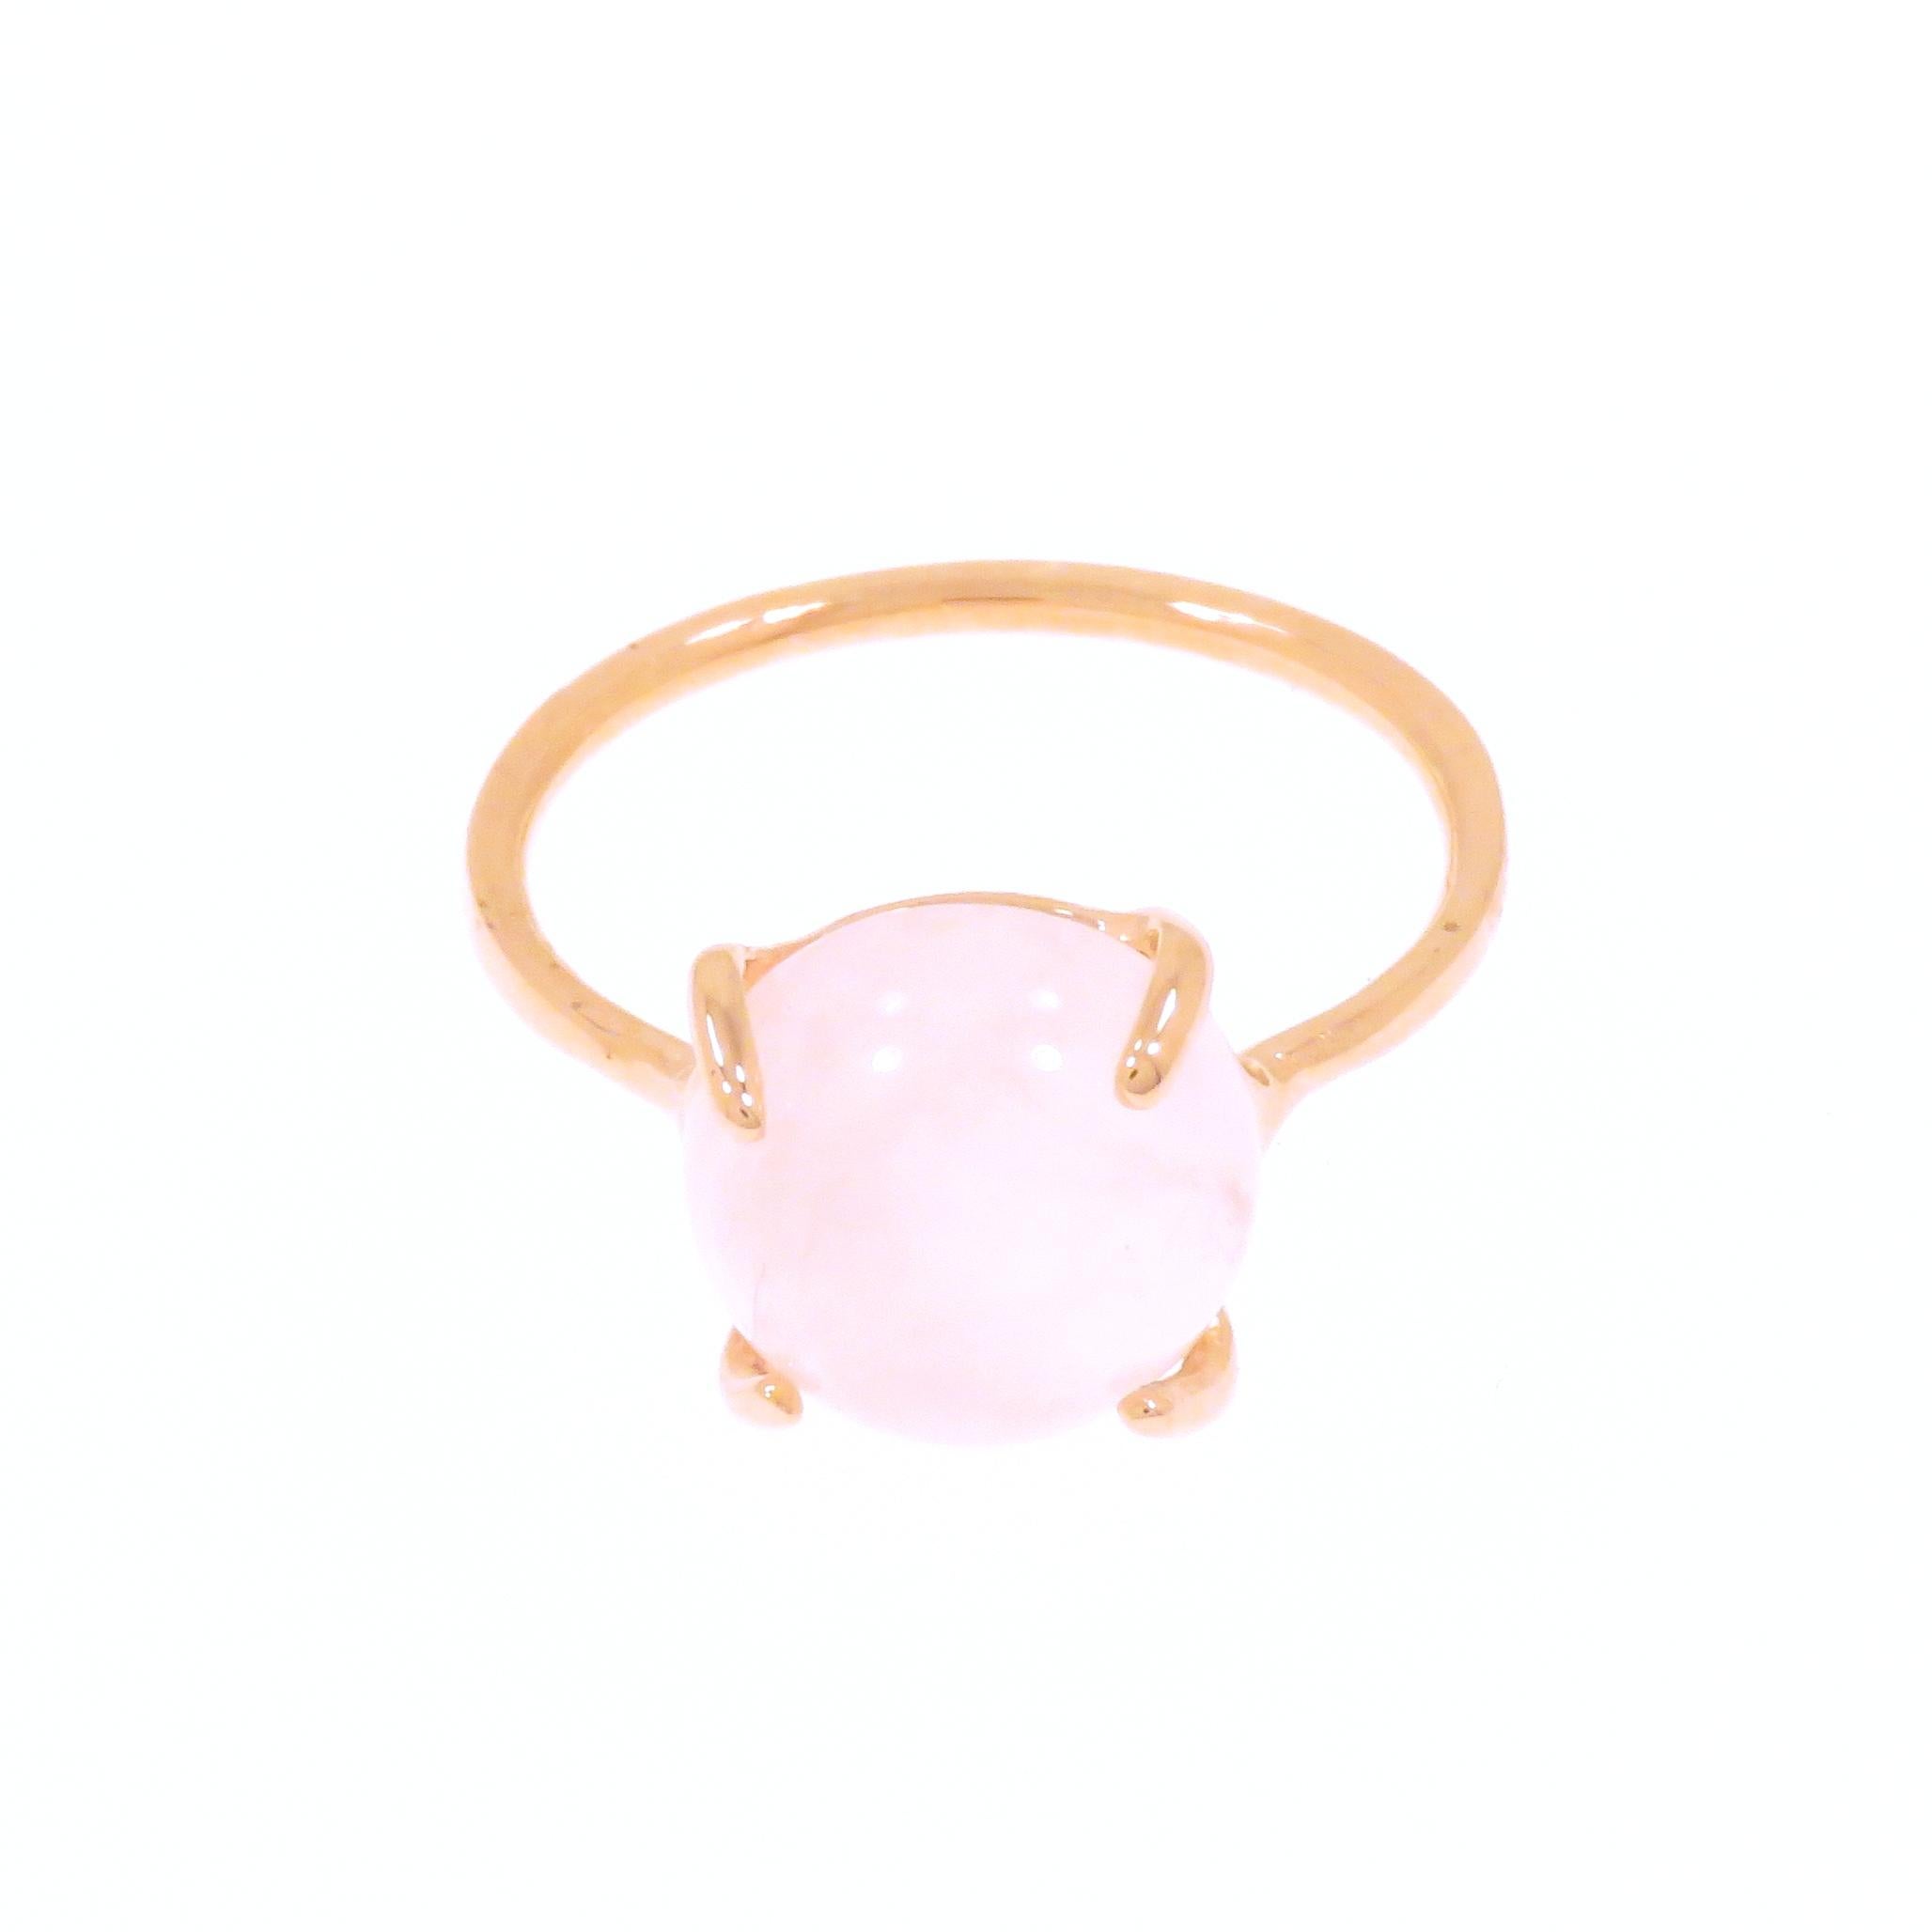 Cabochon cut rose quartz featured in a contemporary ring crafted in 9 karat rose gold. The size of the gemstone is 10x10 mm / 0.393x0.393 inches. US finger size is 6 , French size 52, Italian size 12, resizable to the customer's size before